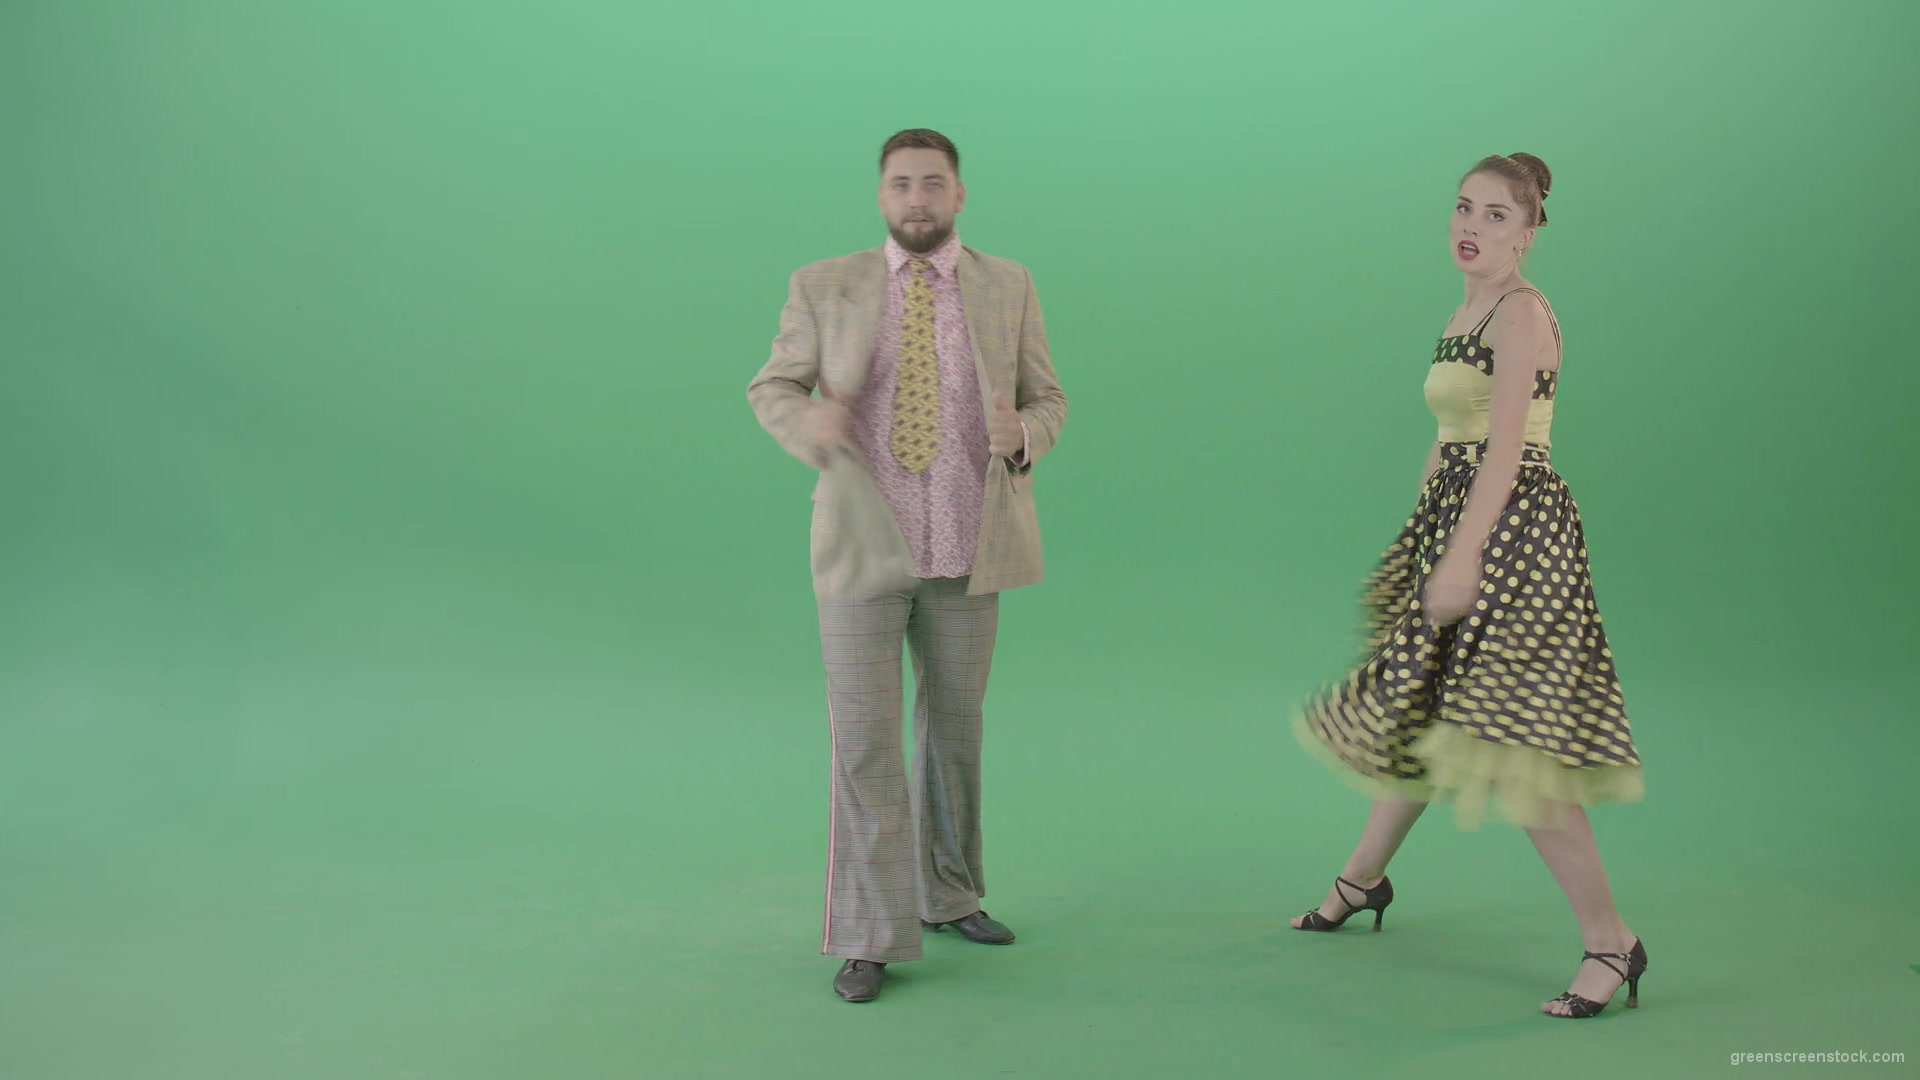 Lovely-couple-jumping-in-Boogie-woogie-dance-isolated-on-Green-Screen-4K-Video-Stock-Footage-1920_008 Green Screen Stock